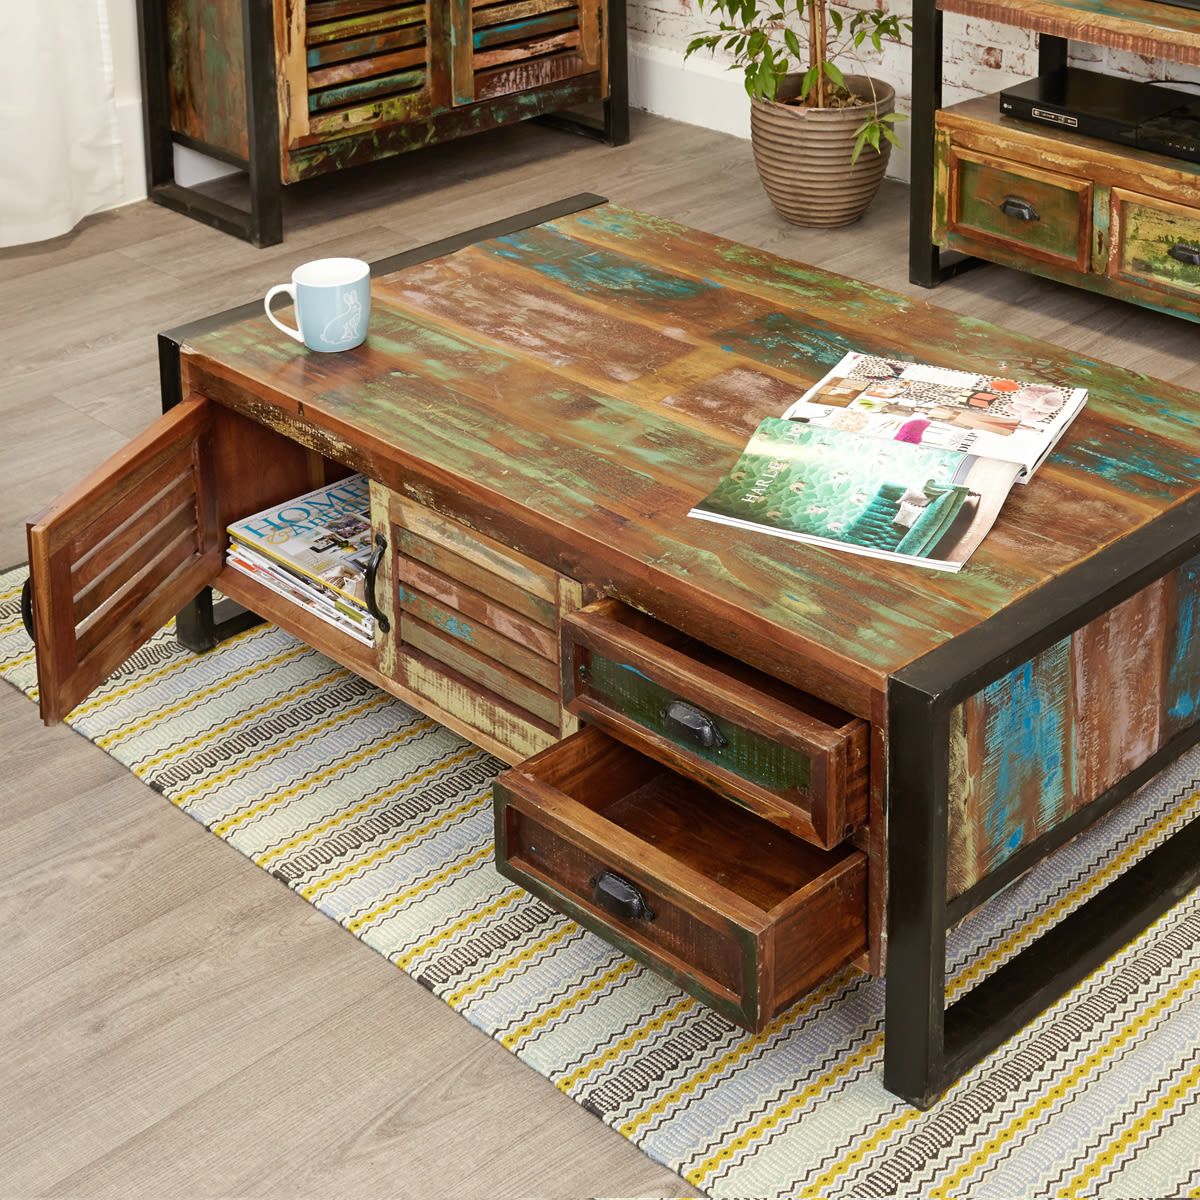 Urban Chic 4 Door 4 Drawers Large Coffee Table Was £480.00 Now £ (View 3 of 20)